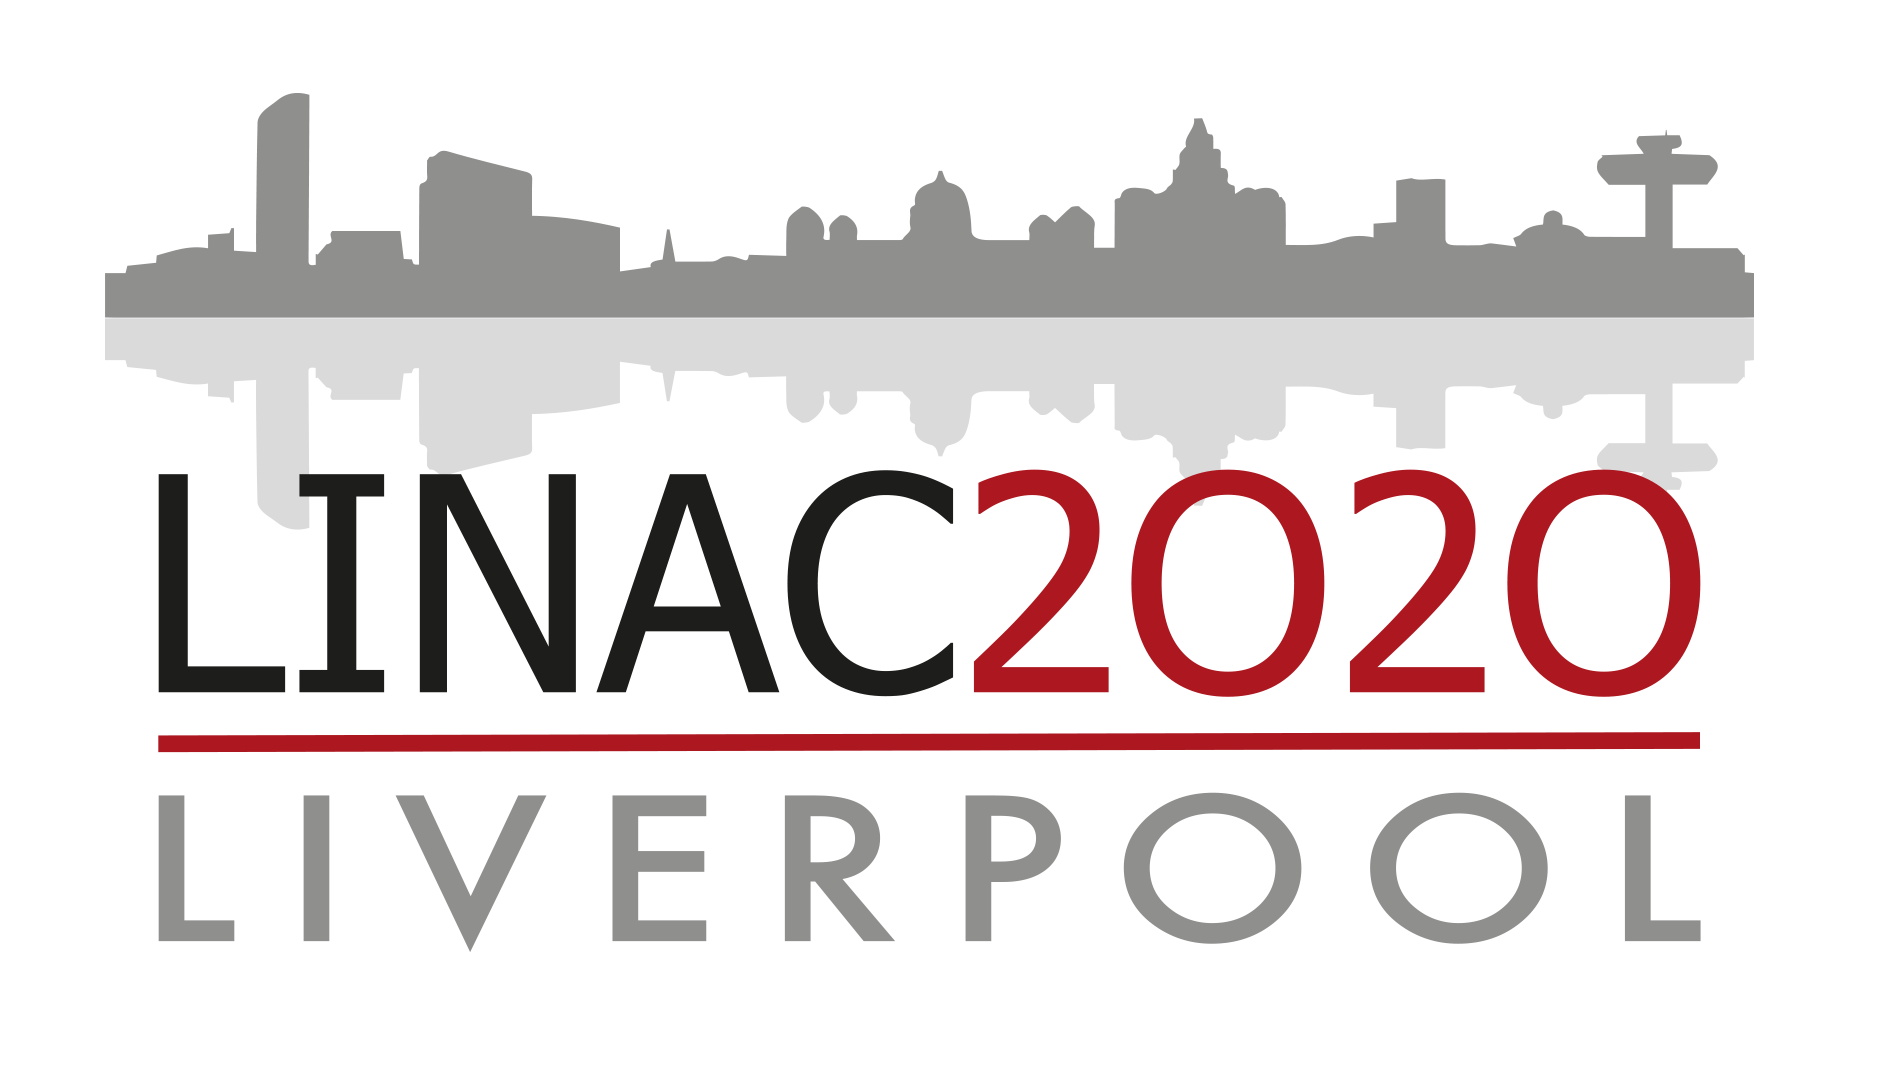 30th International Linear Accelerator Conference 2020